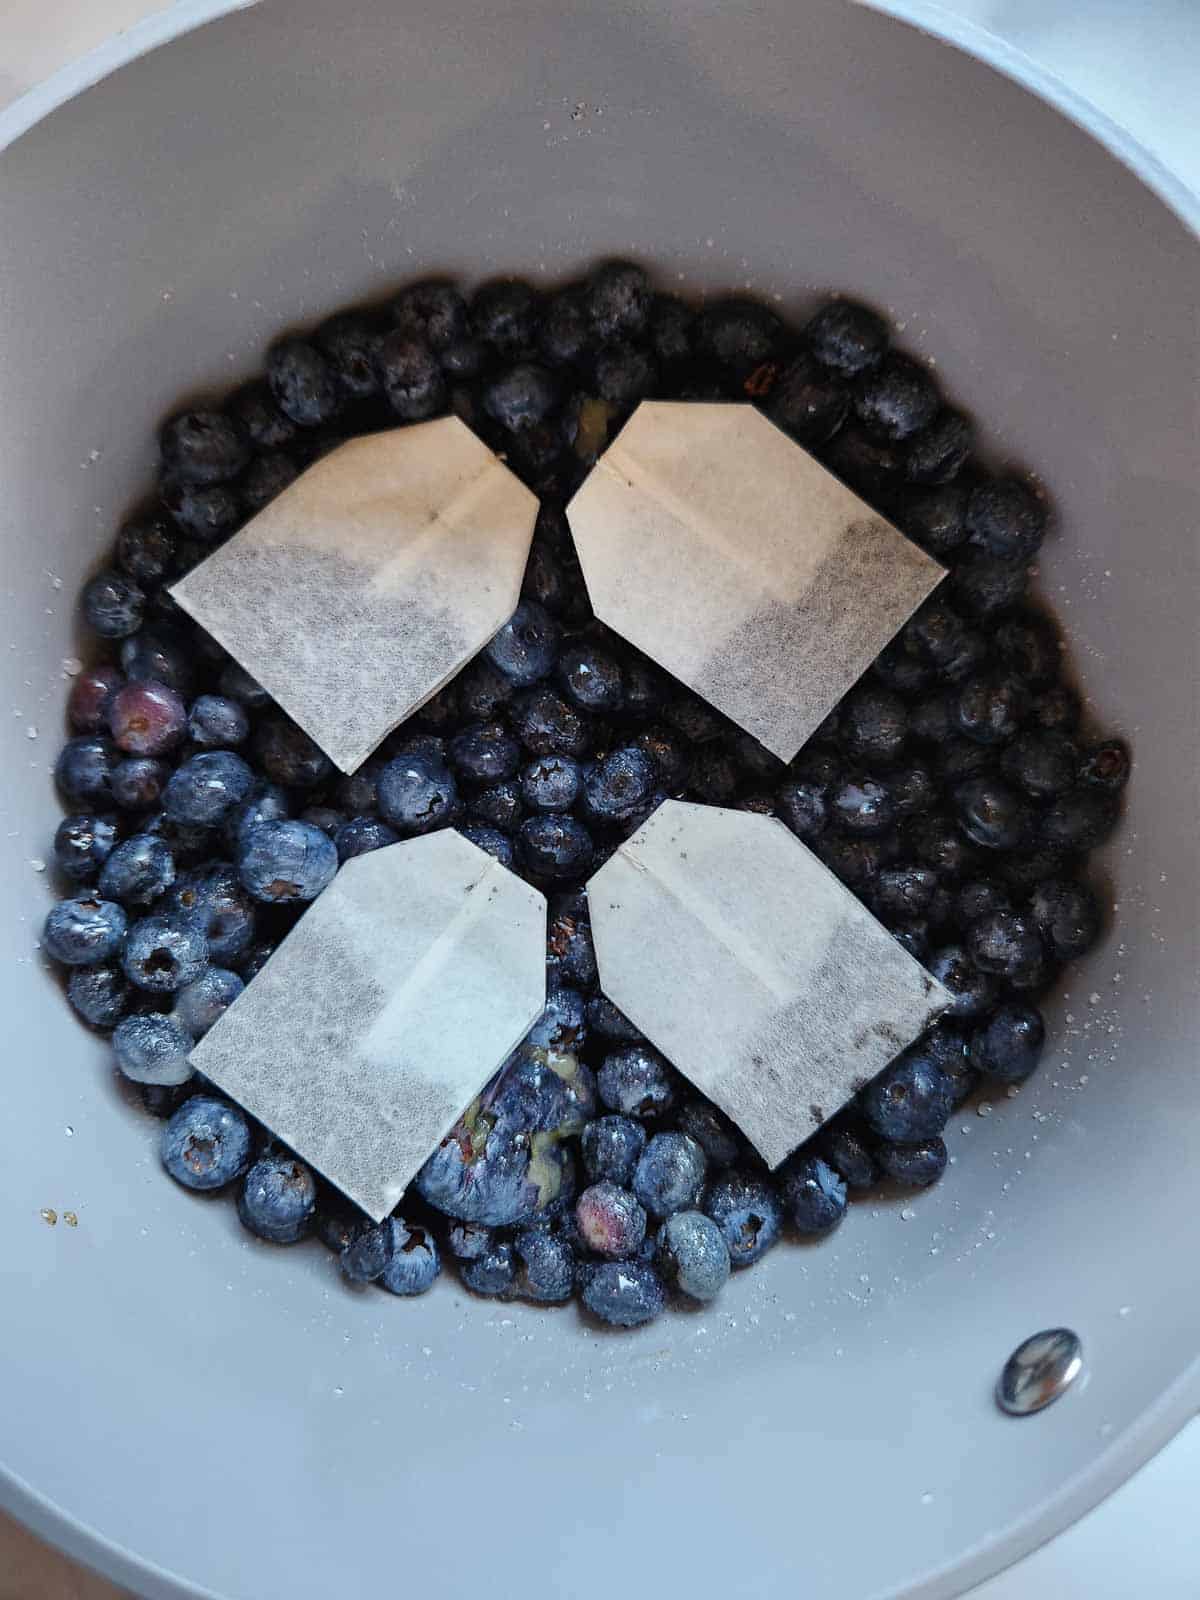 Earl grey tea bags added to blueberry jam in a pot.